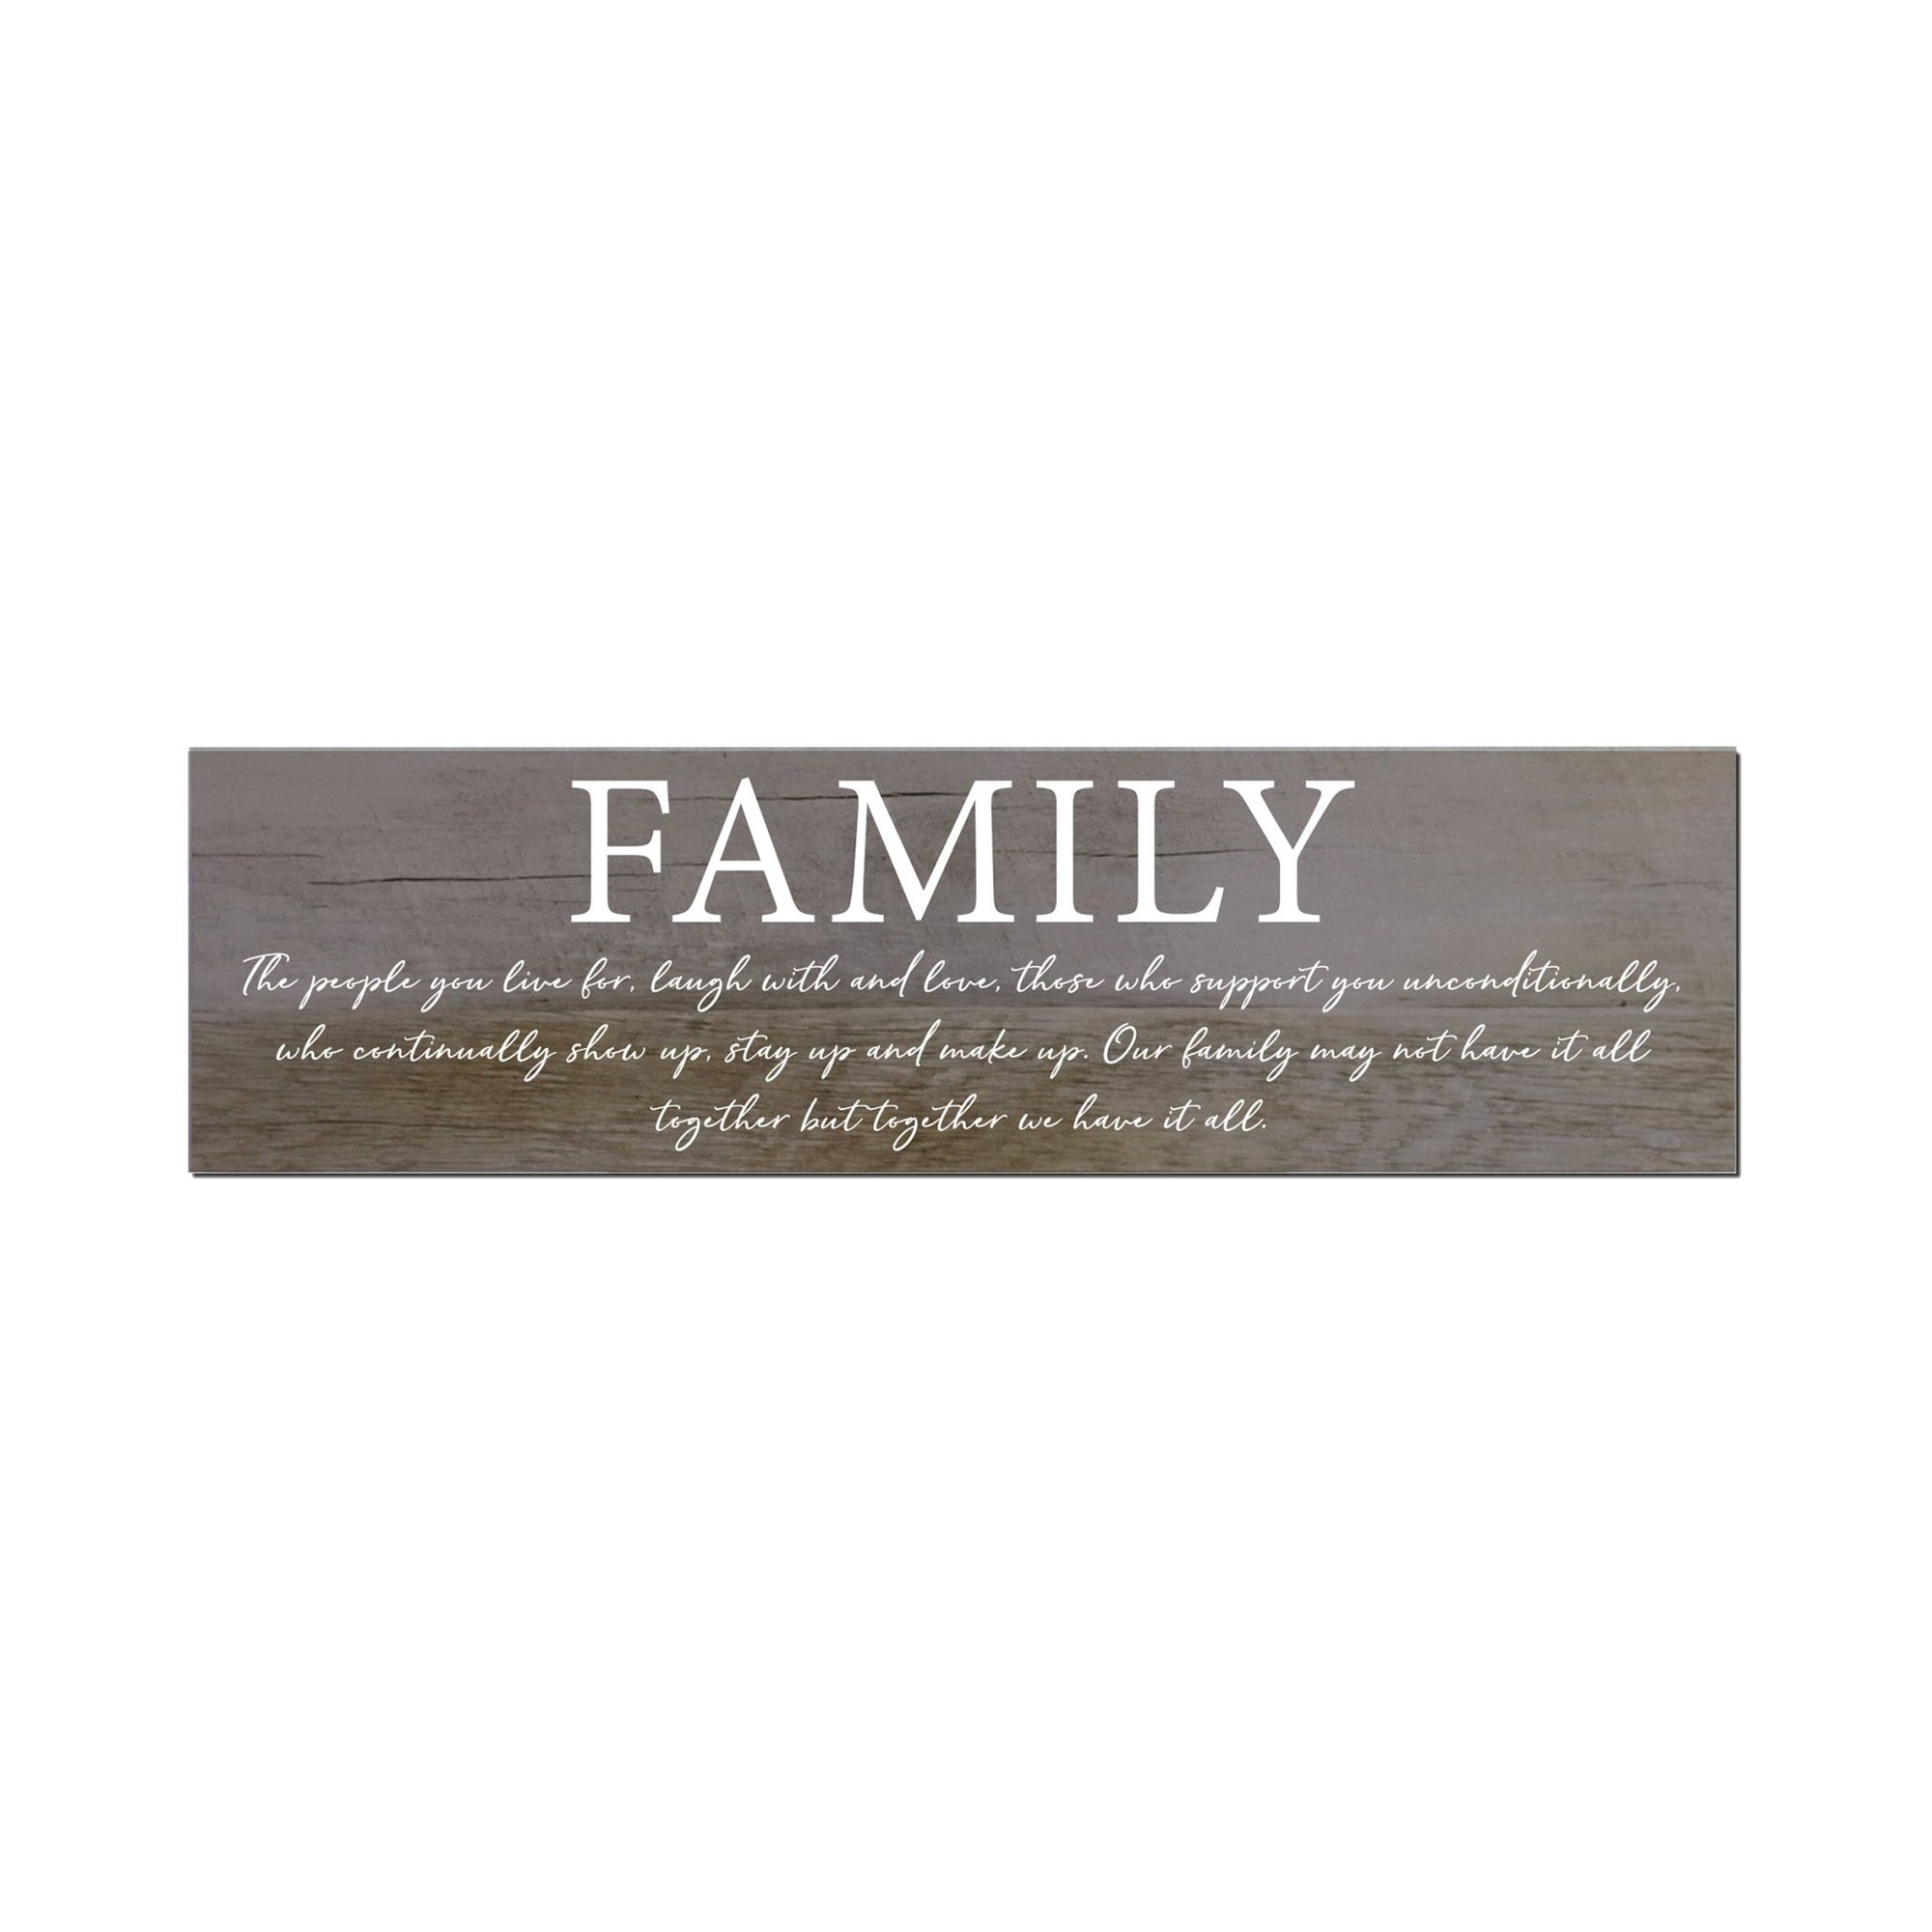 Inspirational Modern Wooden Wall Hanging Family Plaque 22.5x6 - Family - LifeSong Milestones